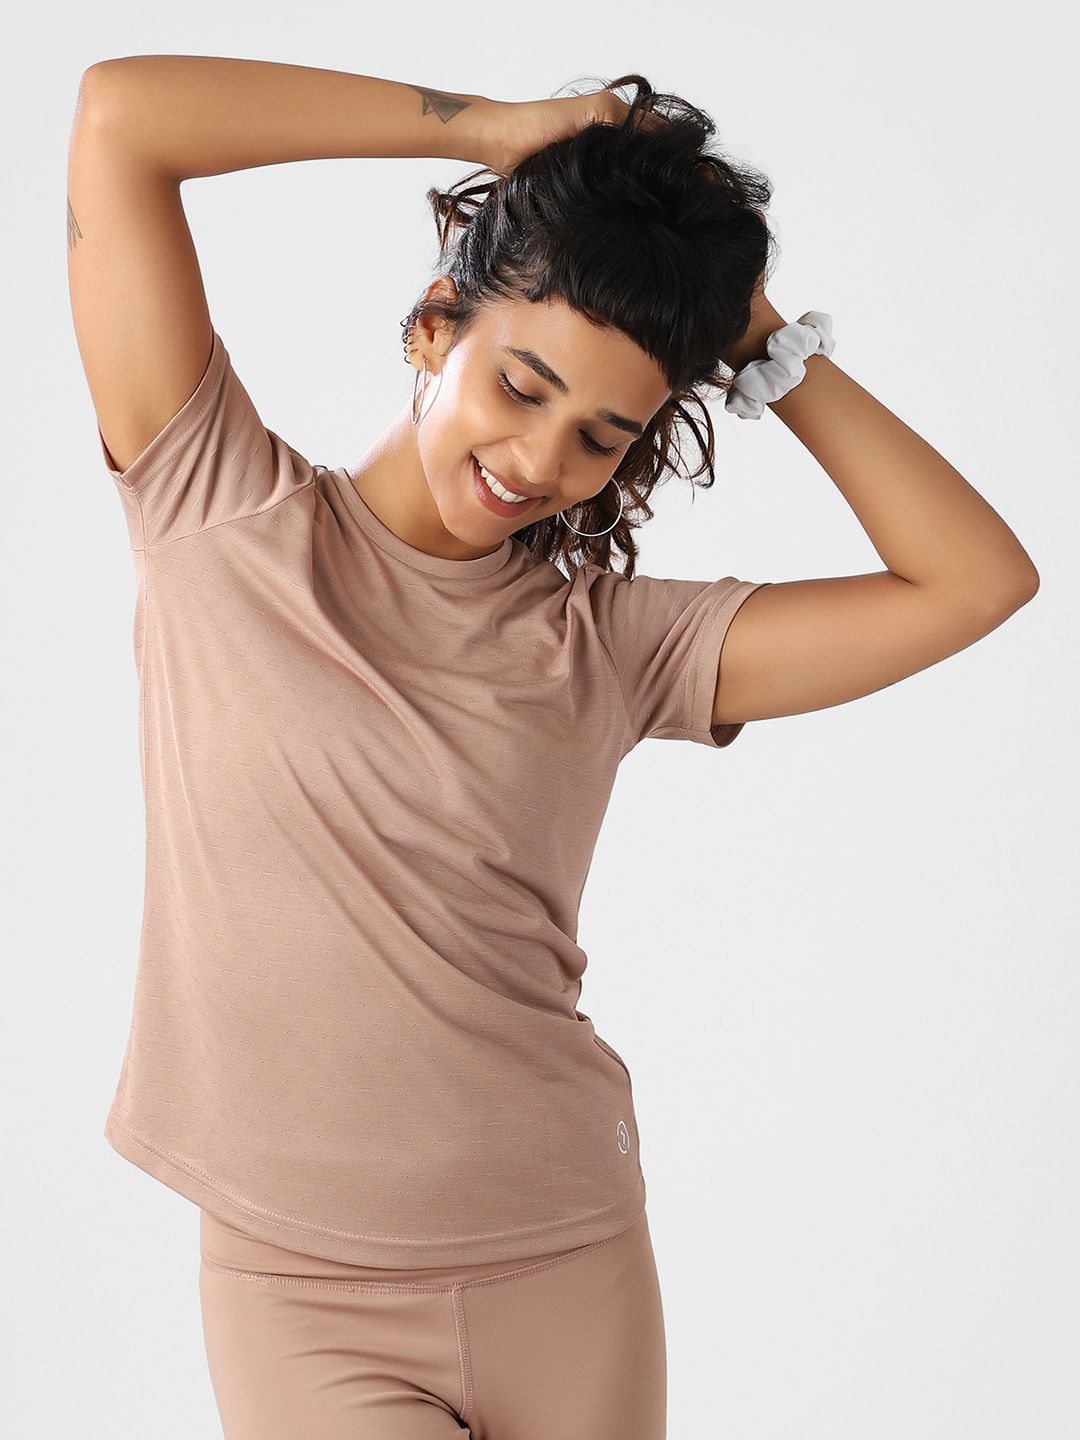 KICA Women Brown Solid Dry Fit Running T-shirt Price in India